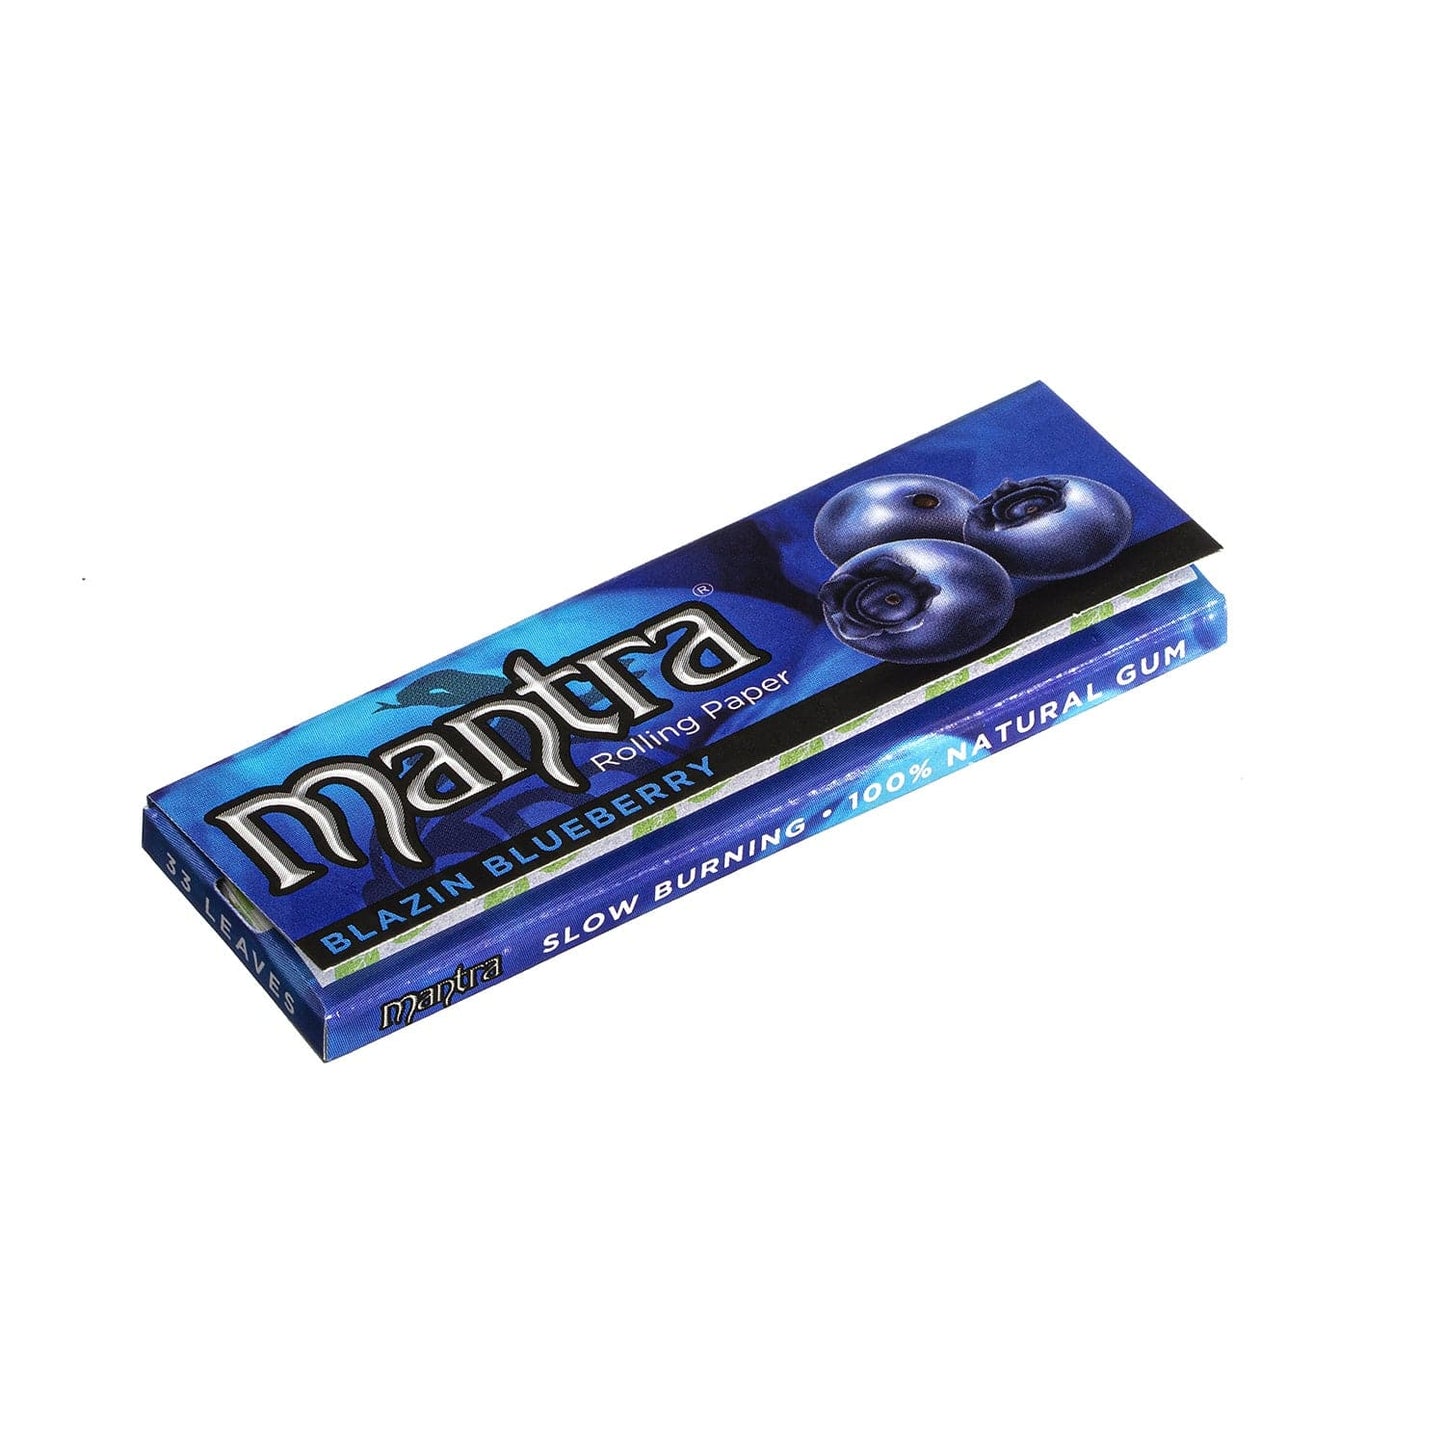 Mantra Flavored Rolling Paper Blazin Blueberry